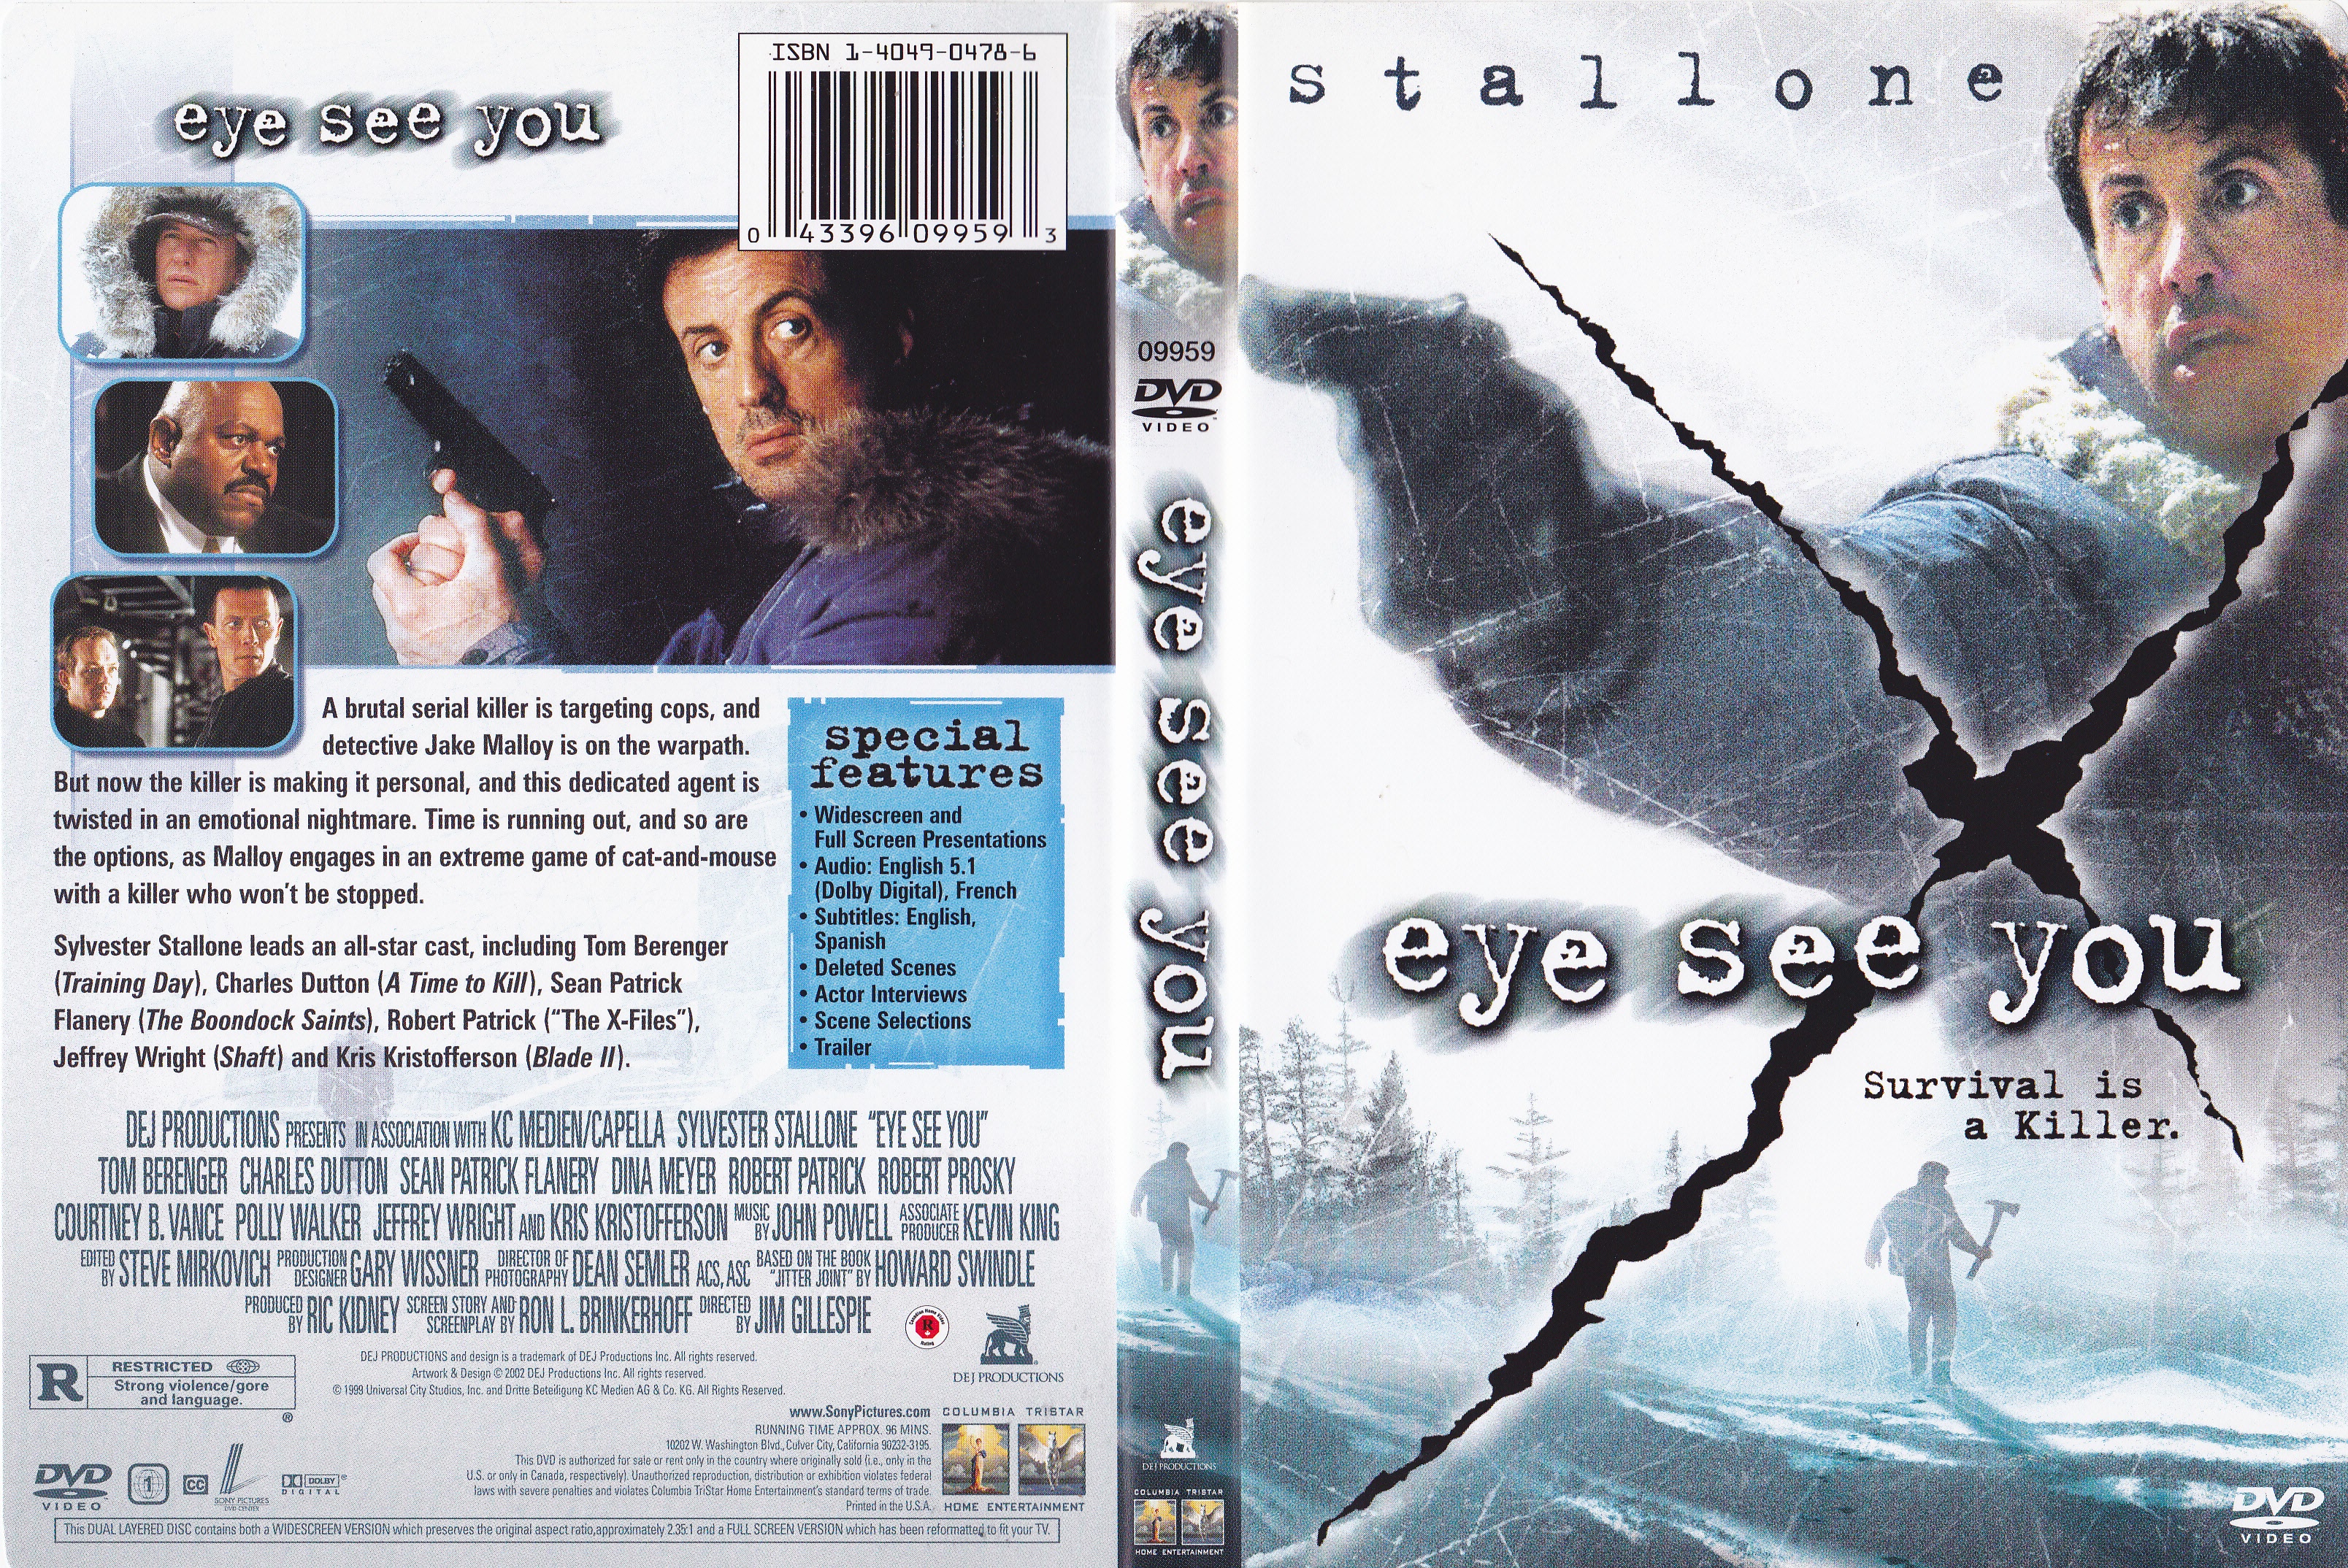 Jaquette DVD Eye see you Zone 1